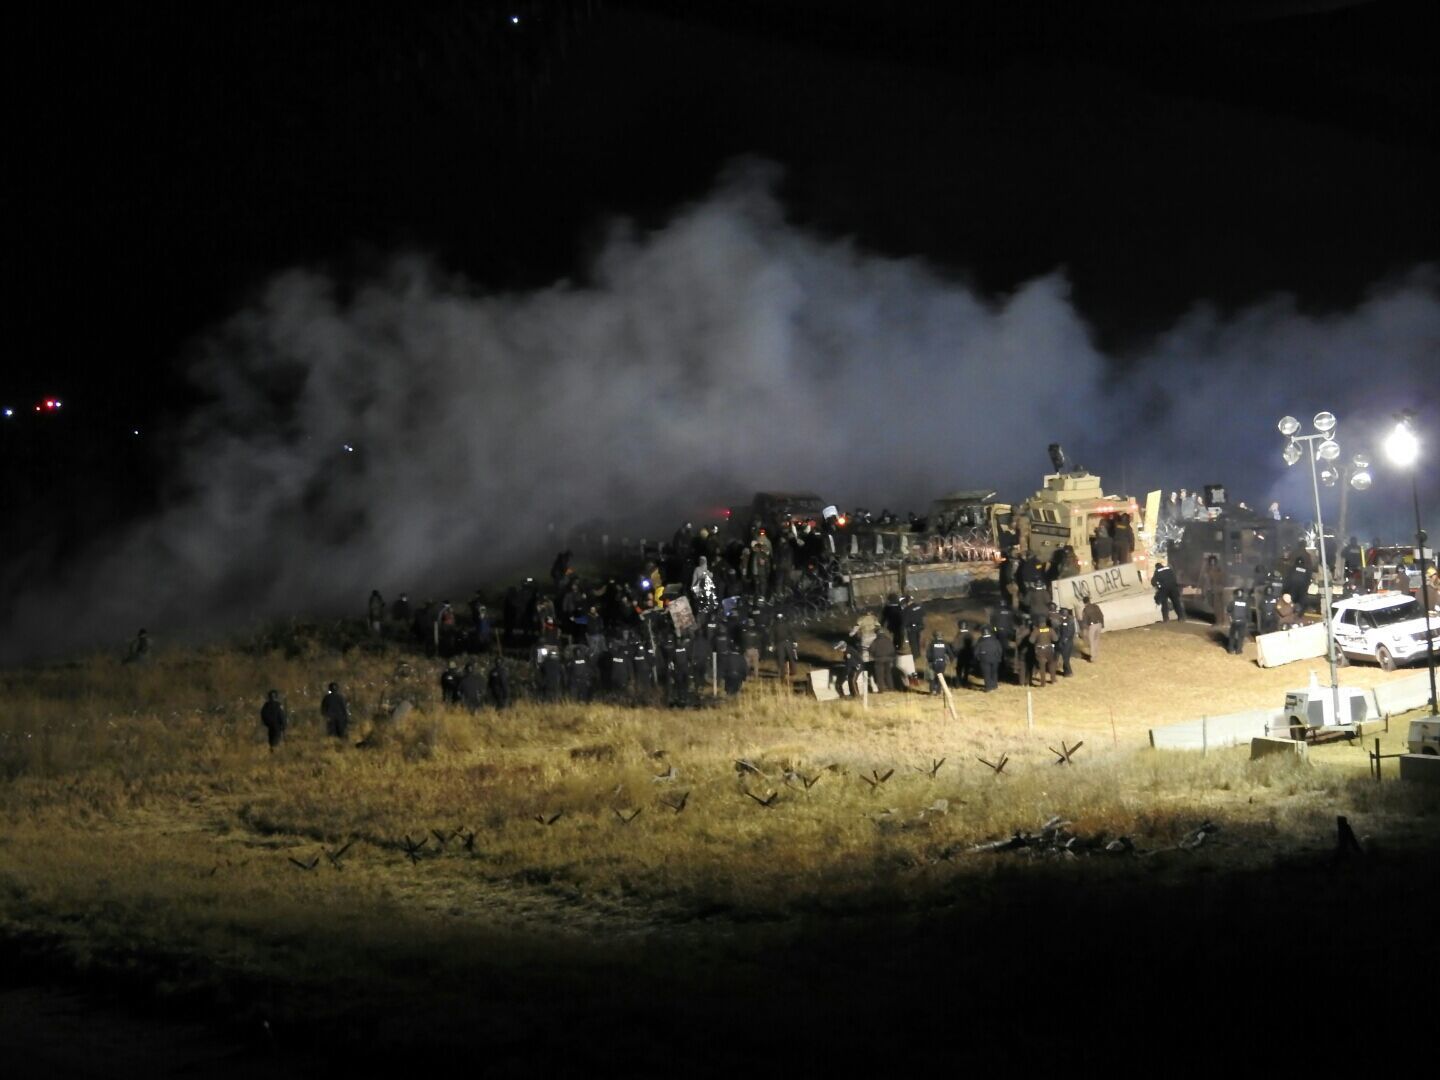 In this image provided by Morton County Sheriff’s Department, law enforcement and protesters clash near the site of the Dakota Access pipeline on Nov. 20, 2016, in Cannon Ball, N.D. (Morton County Sheriff’s Department/AP)